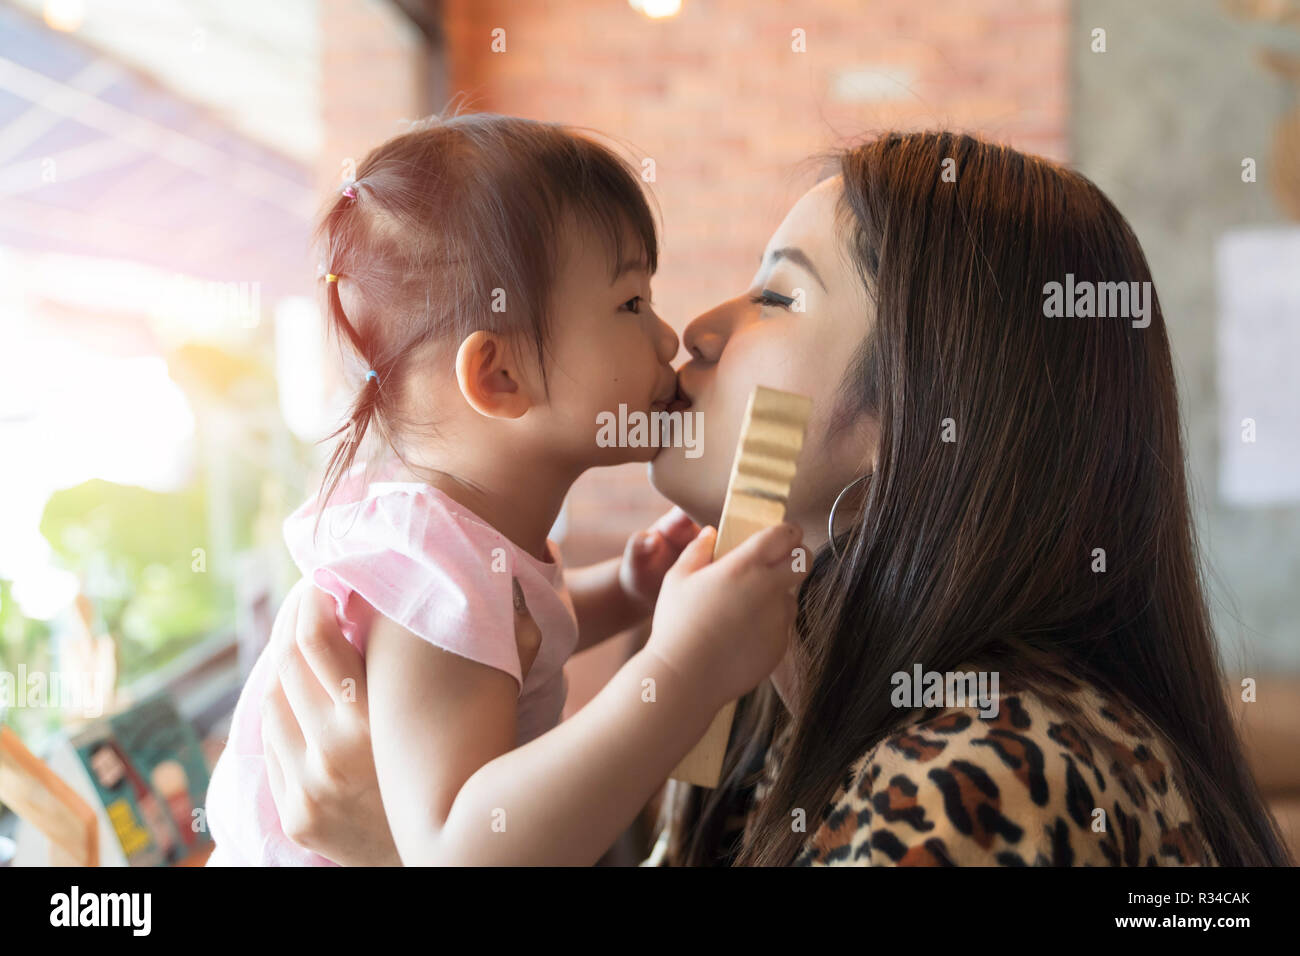 Asian family happiness, with baby girl and parent in the cafe. Stock Photo